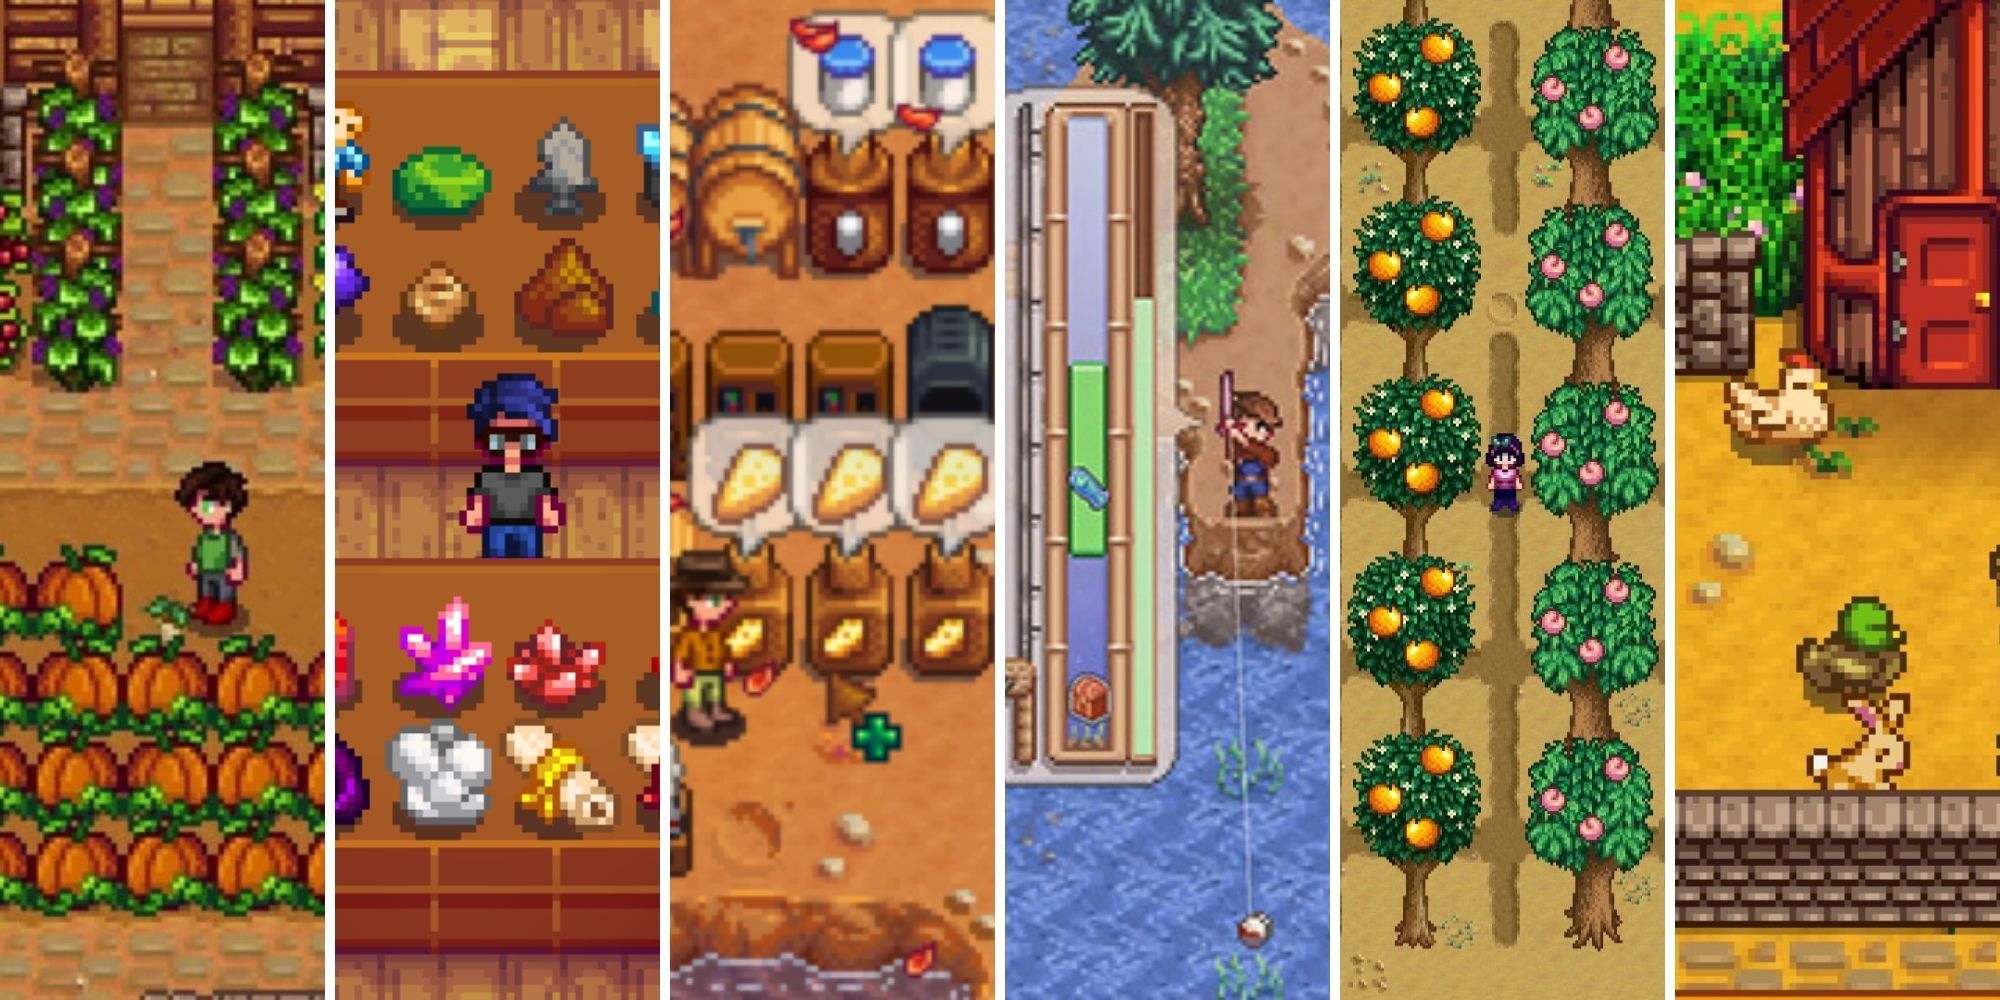 Stardew Valley - Split image of various scenes from day to day life